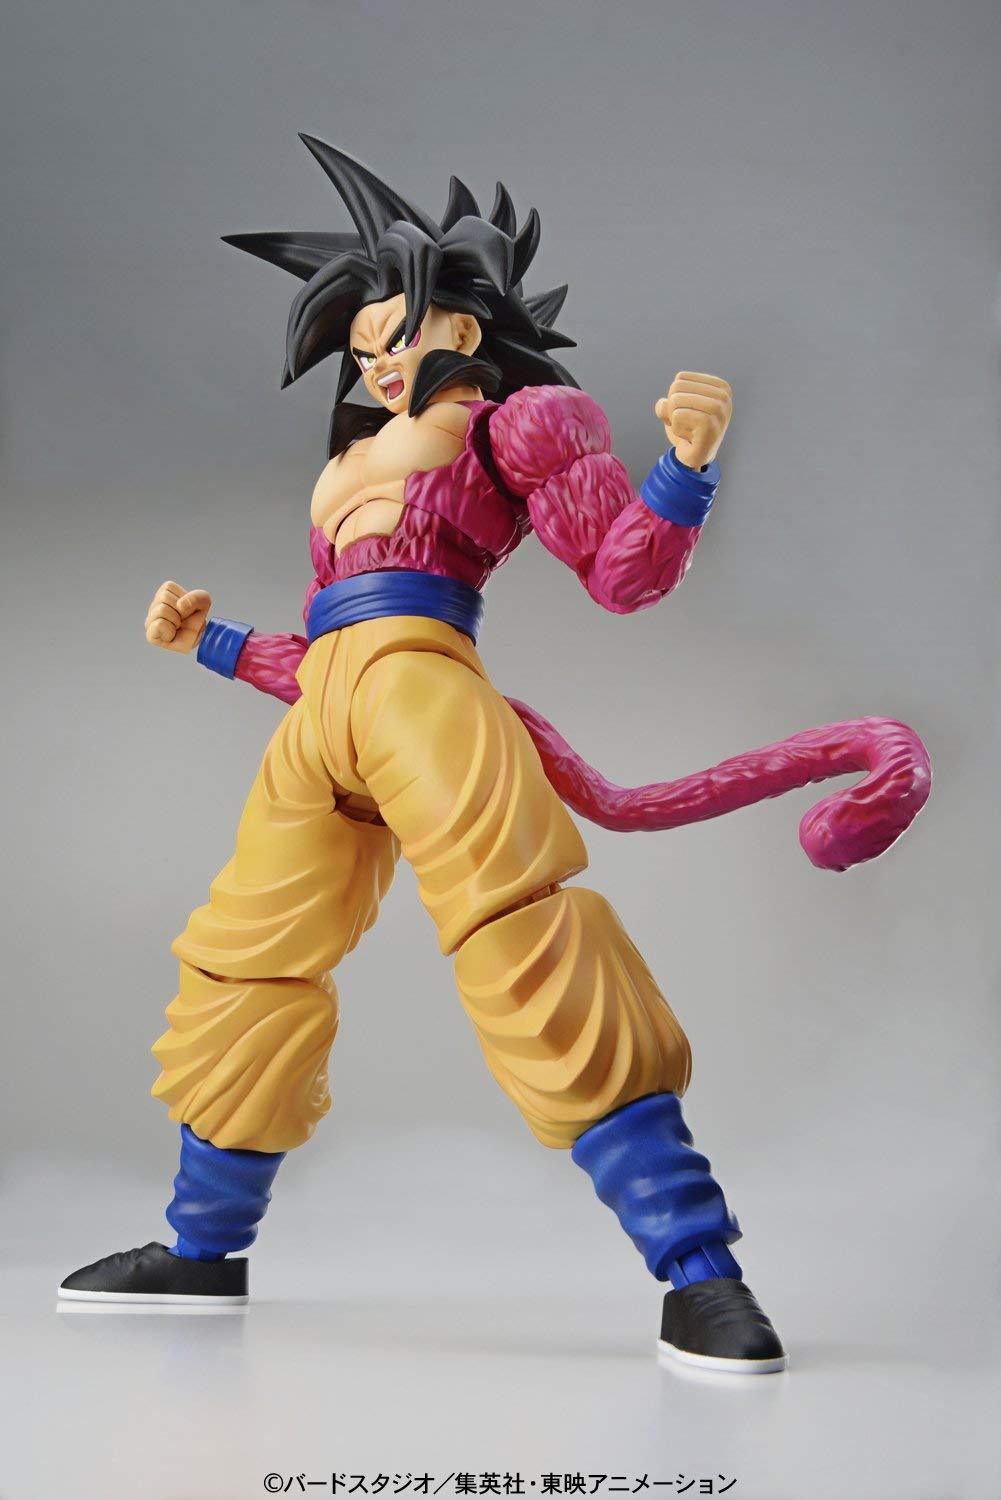 finally getting 1:12 scale SH figuarts One Piece after so many years! :  r/OnePiece